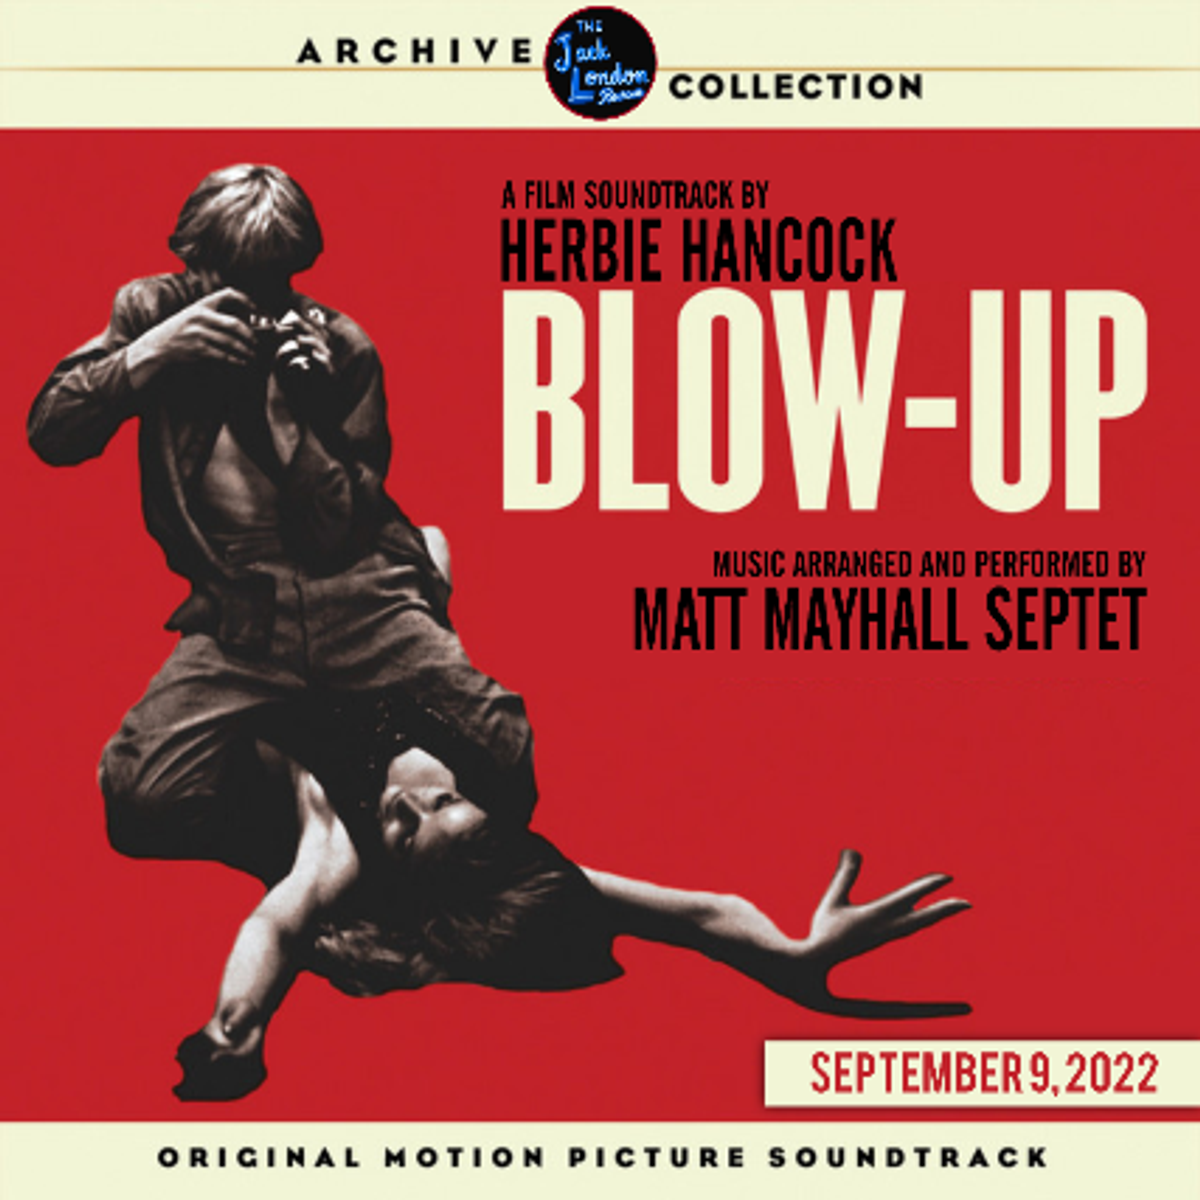 Matt Mayhall Septet Plays the Soundtrack to Blow-Up by Herbie